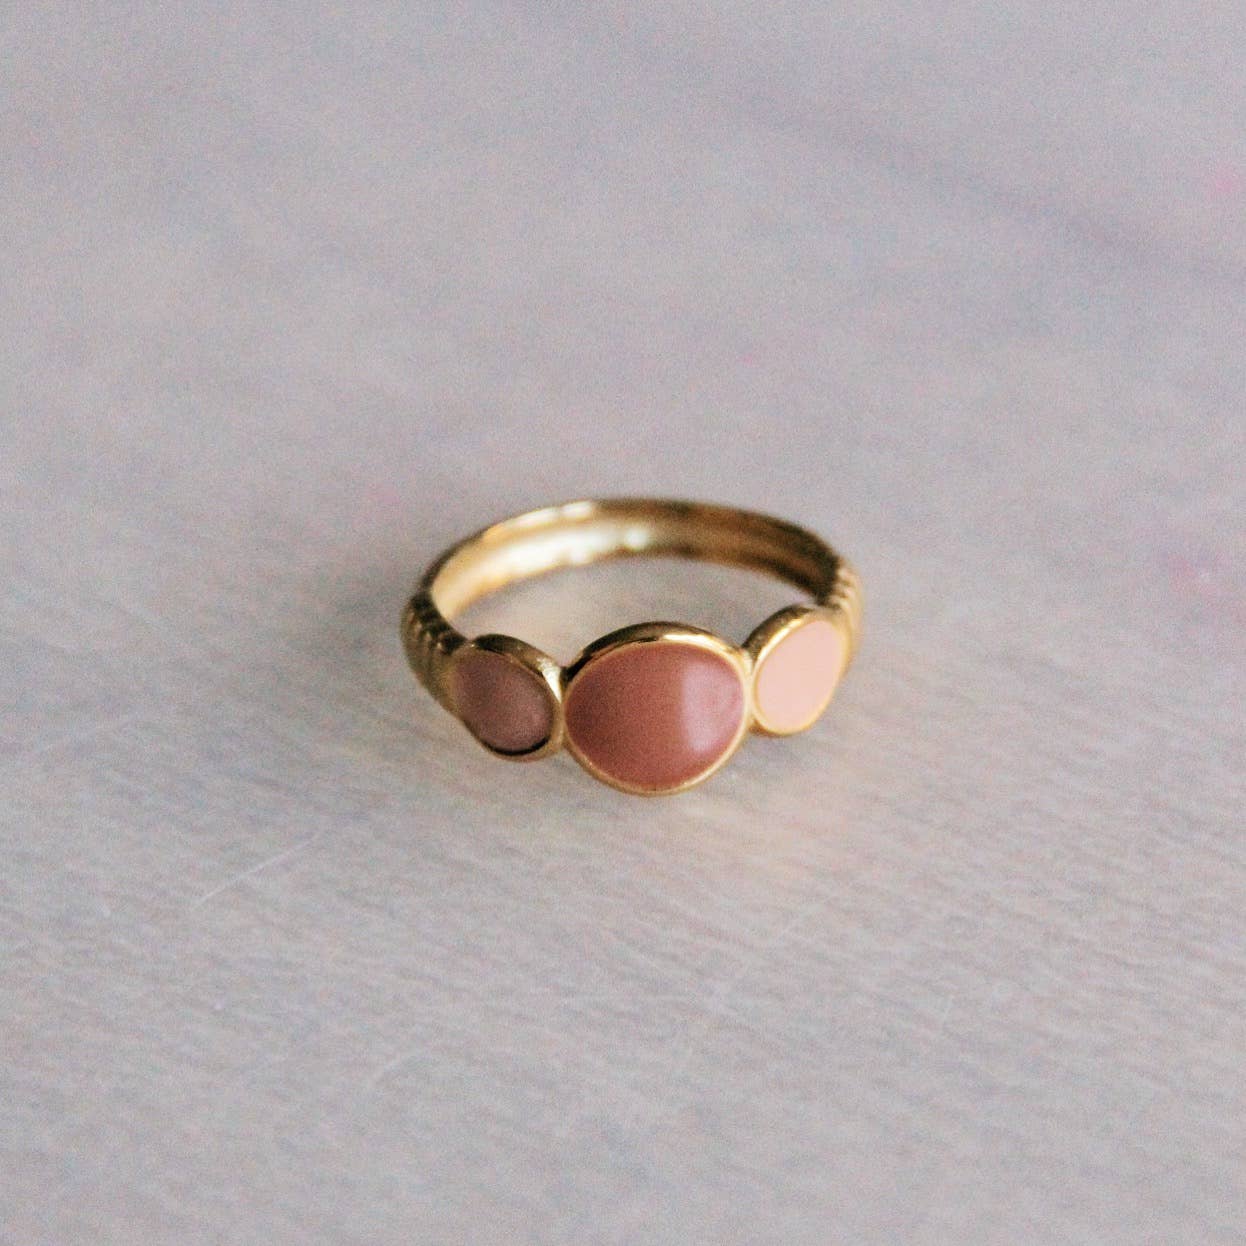 Stainless steel ring with round enamel – salmon/light coral